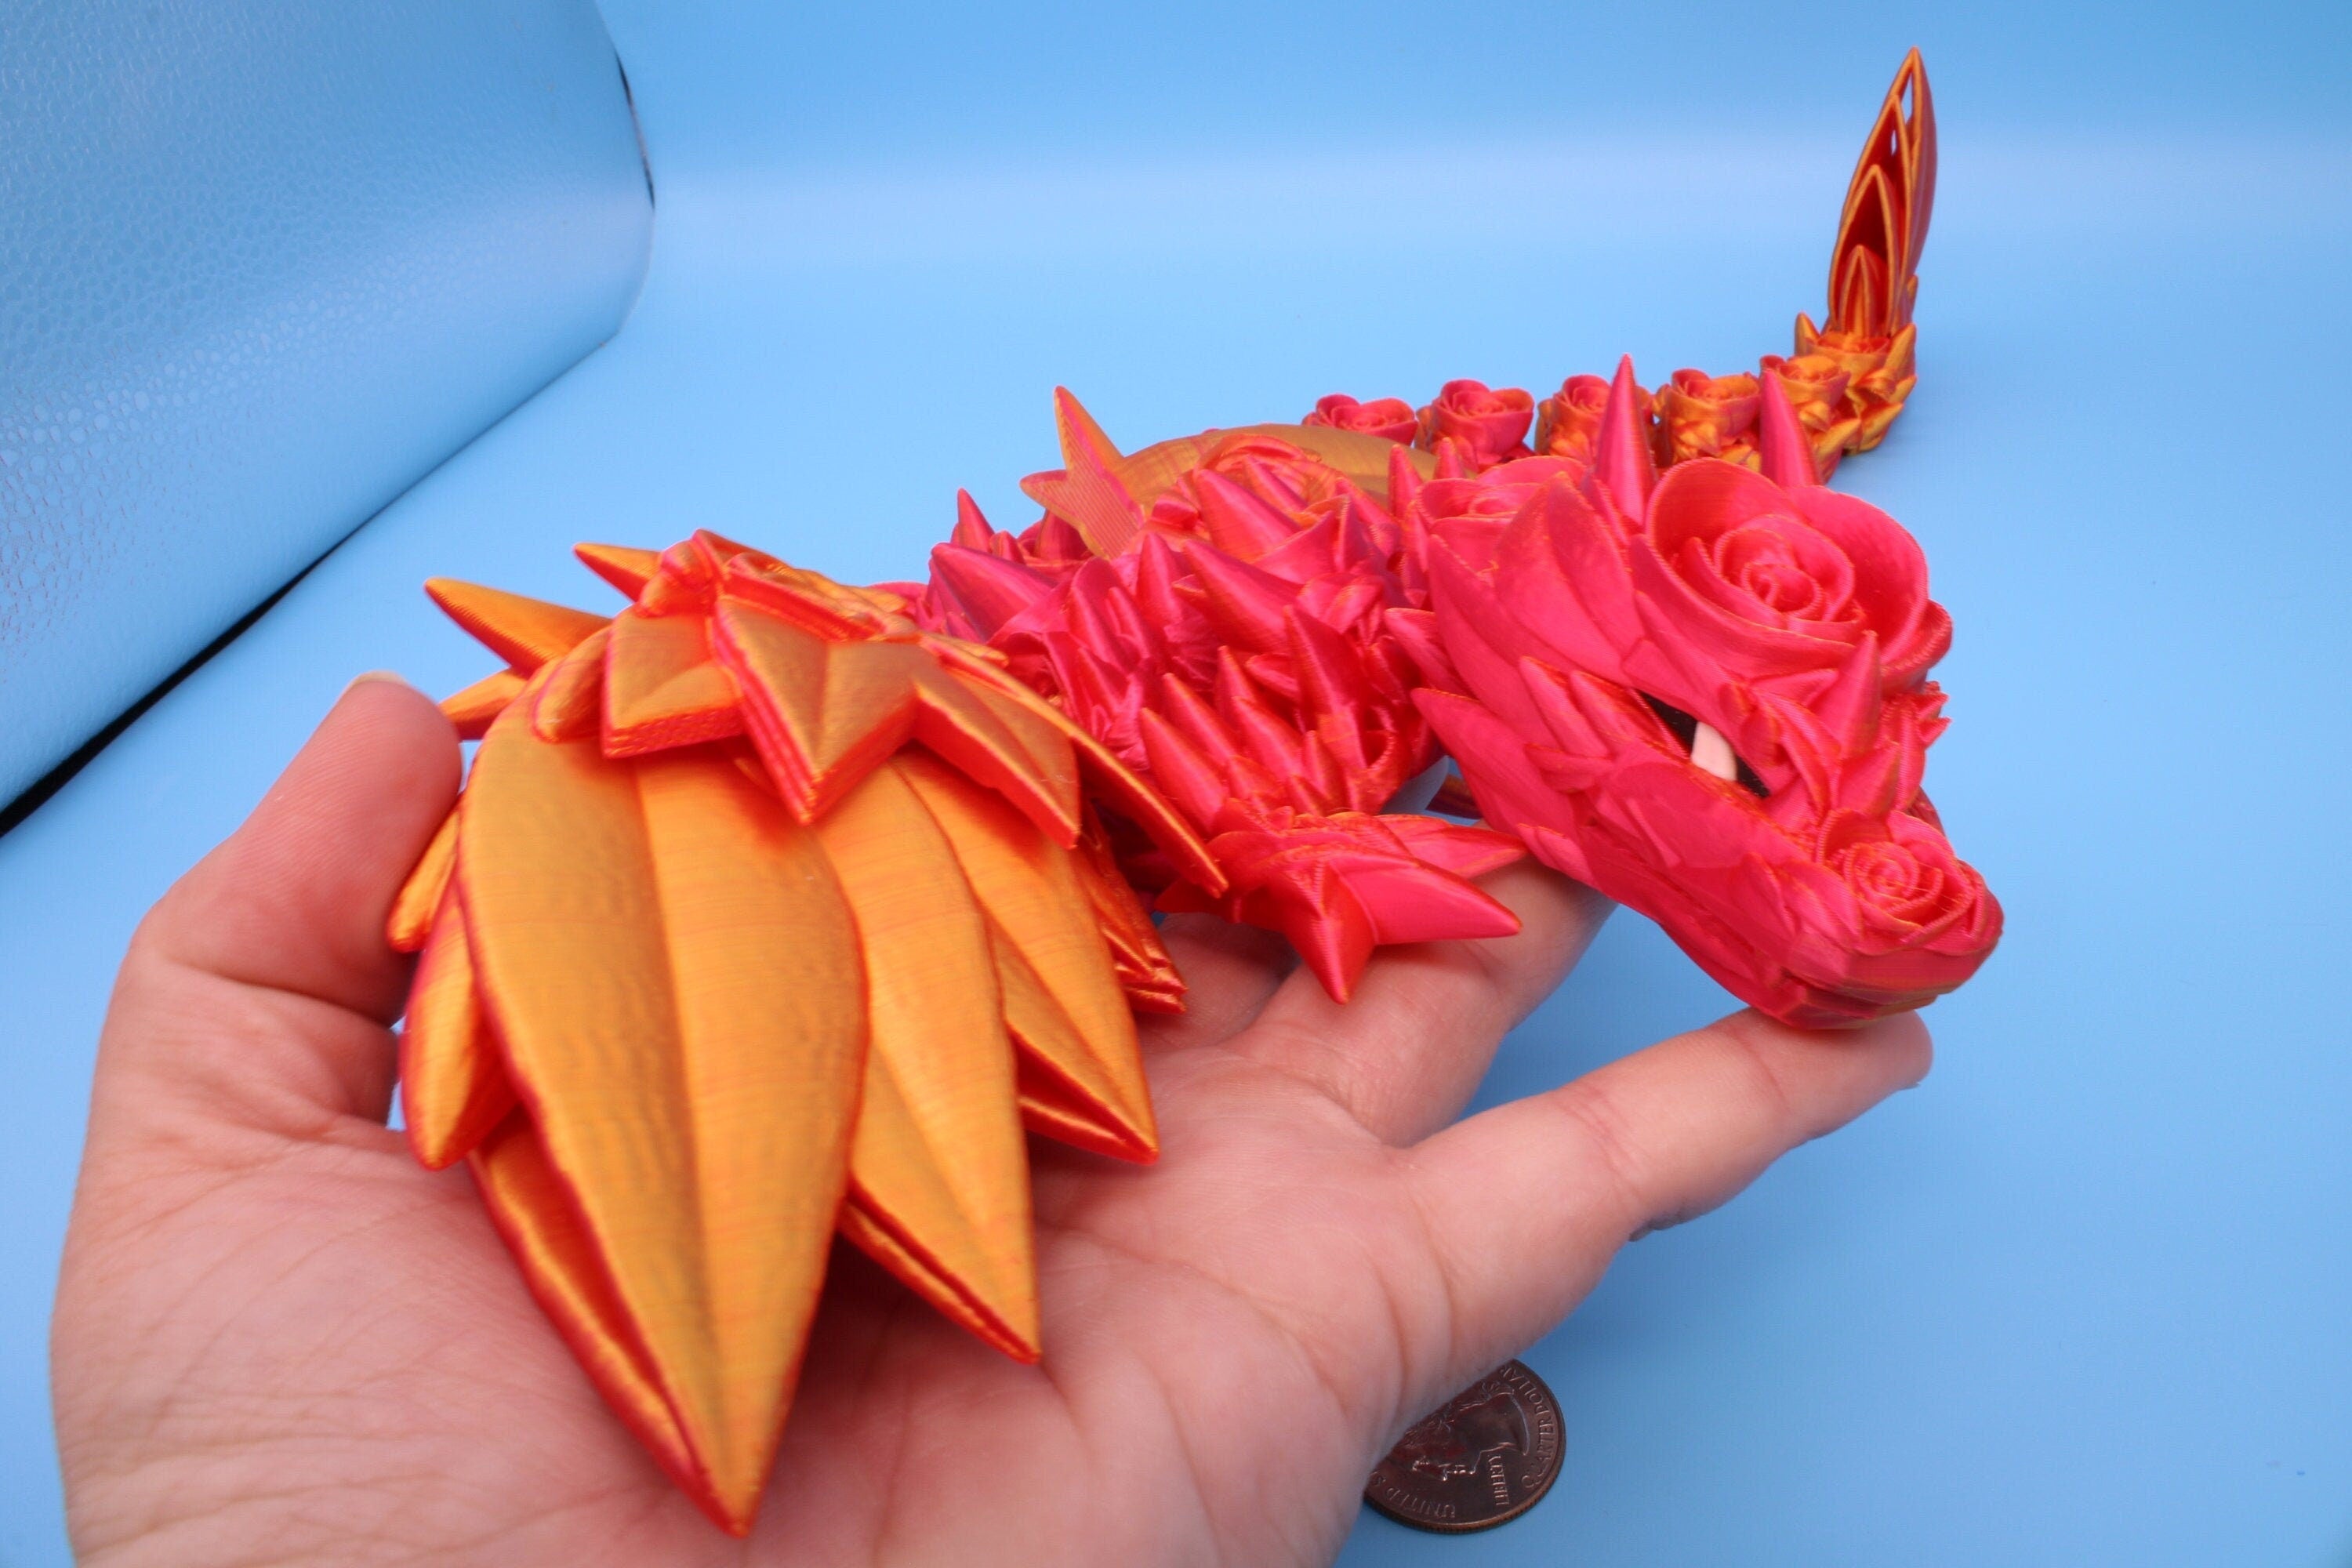 Pink & Gold Rose Wing Articulating Dragon | 3D Printed Fidget | Flexi Toy | Adult Fidget Toy | Sensory Desk Toy | 19 in. | Valentines Day